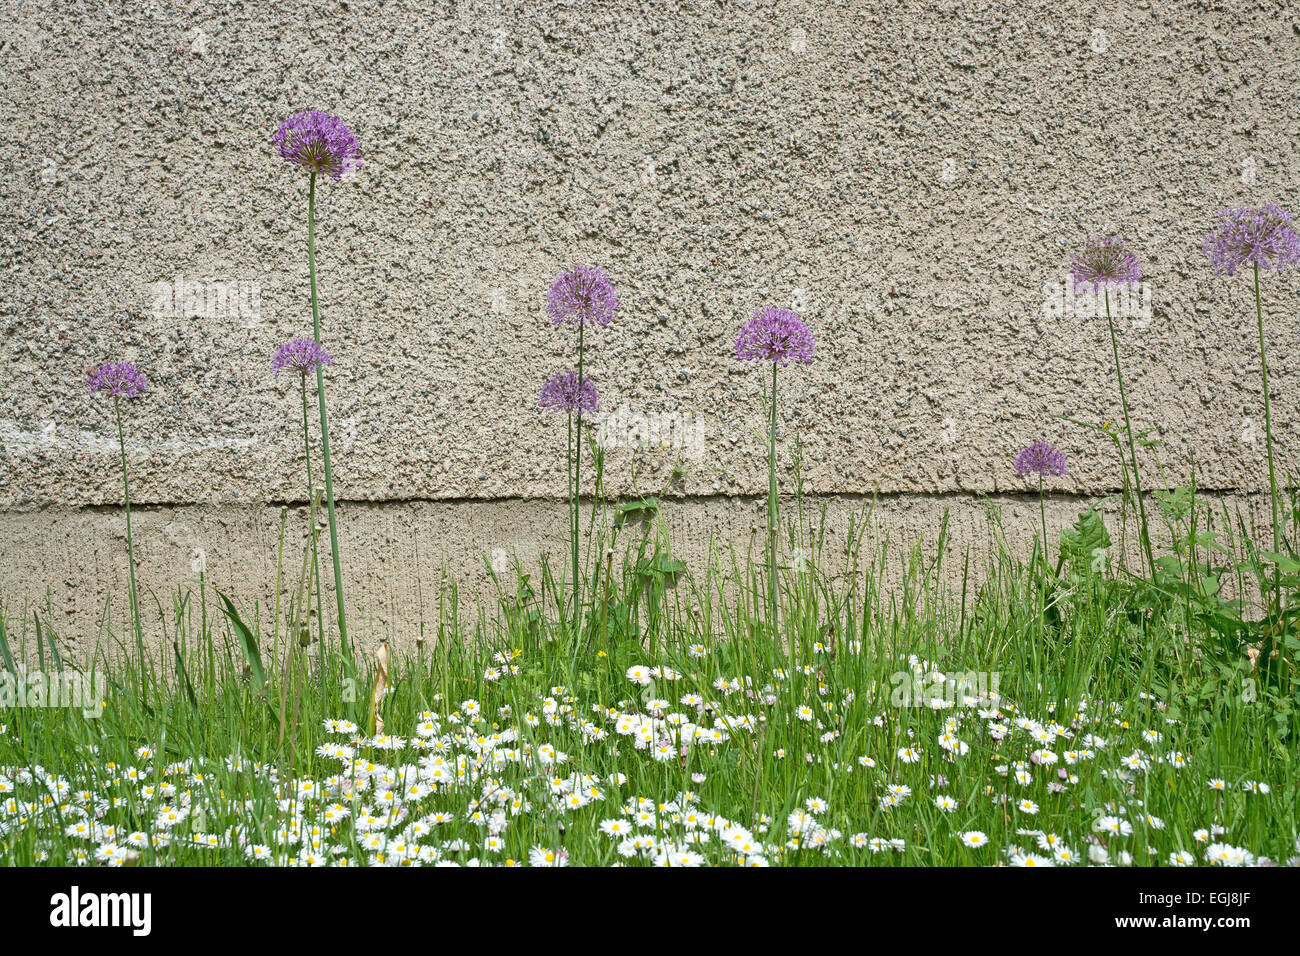 Allium flowers with purple ball like flowers against a roughcast wall, abstract composition. Stock Photo